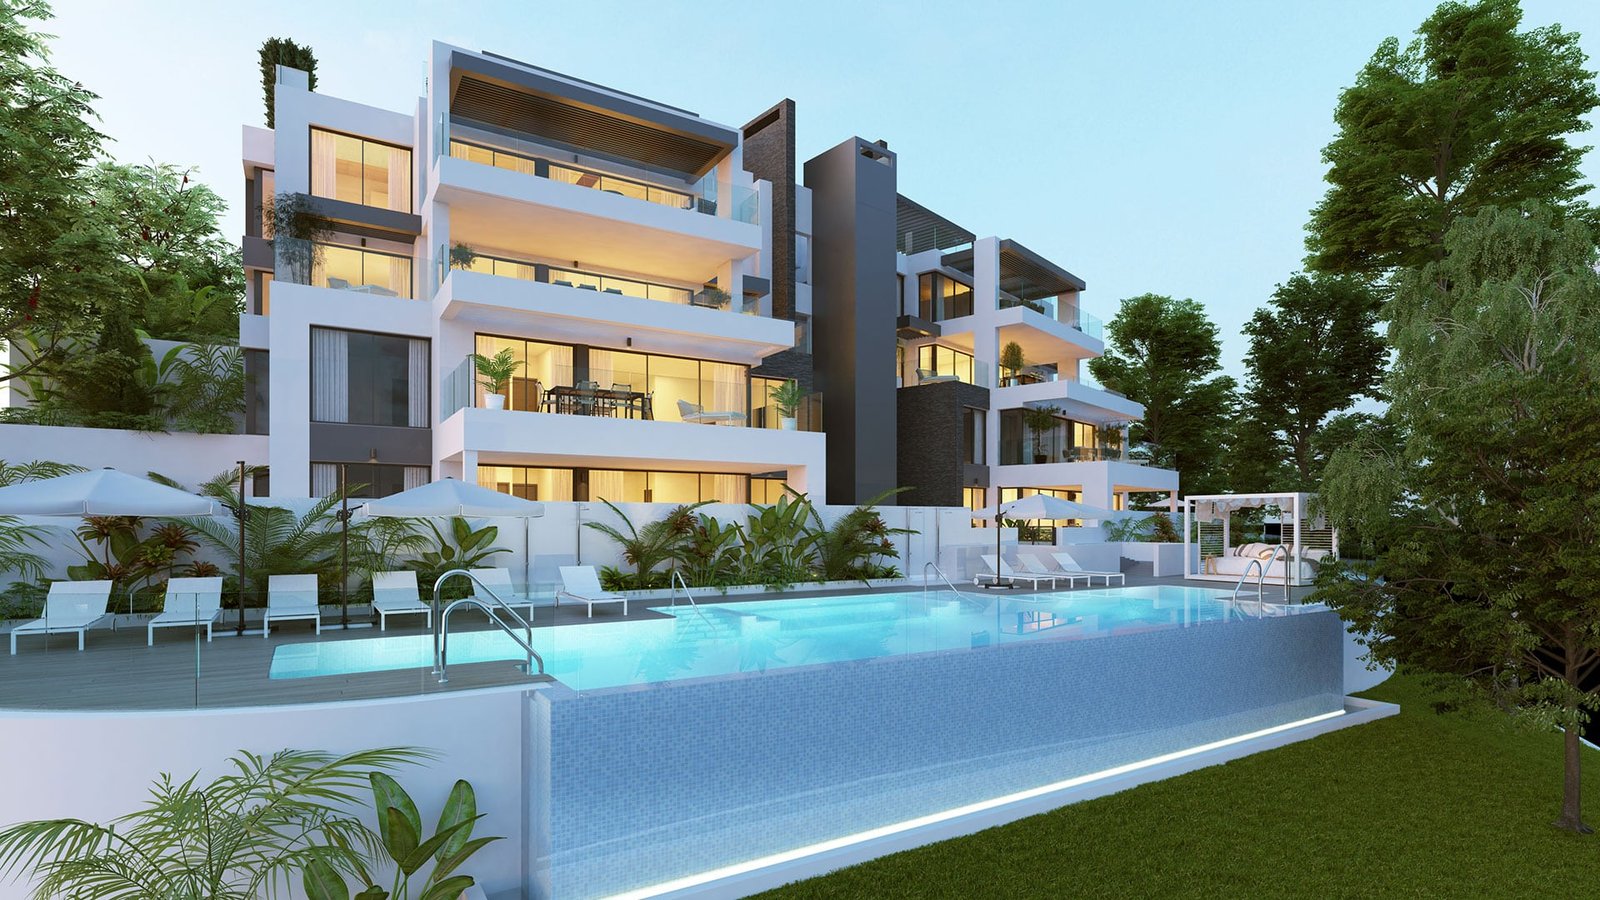 Unique development of exclusive apartments and penthouses with 2, 3 and 4 bedrooms.